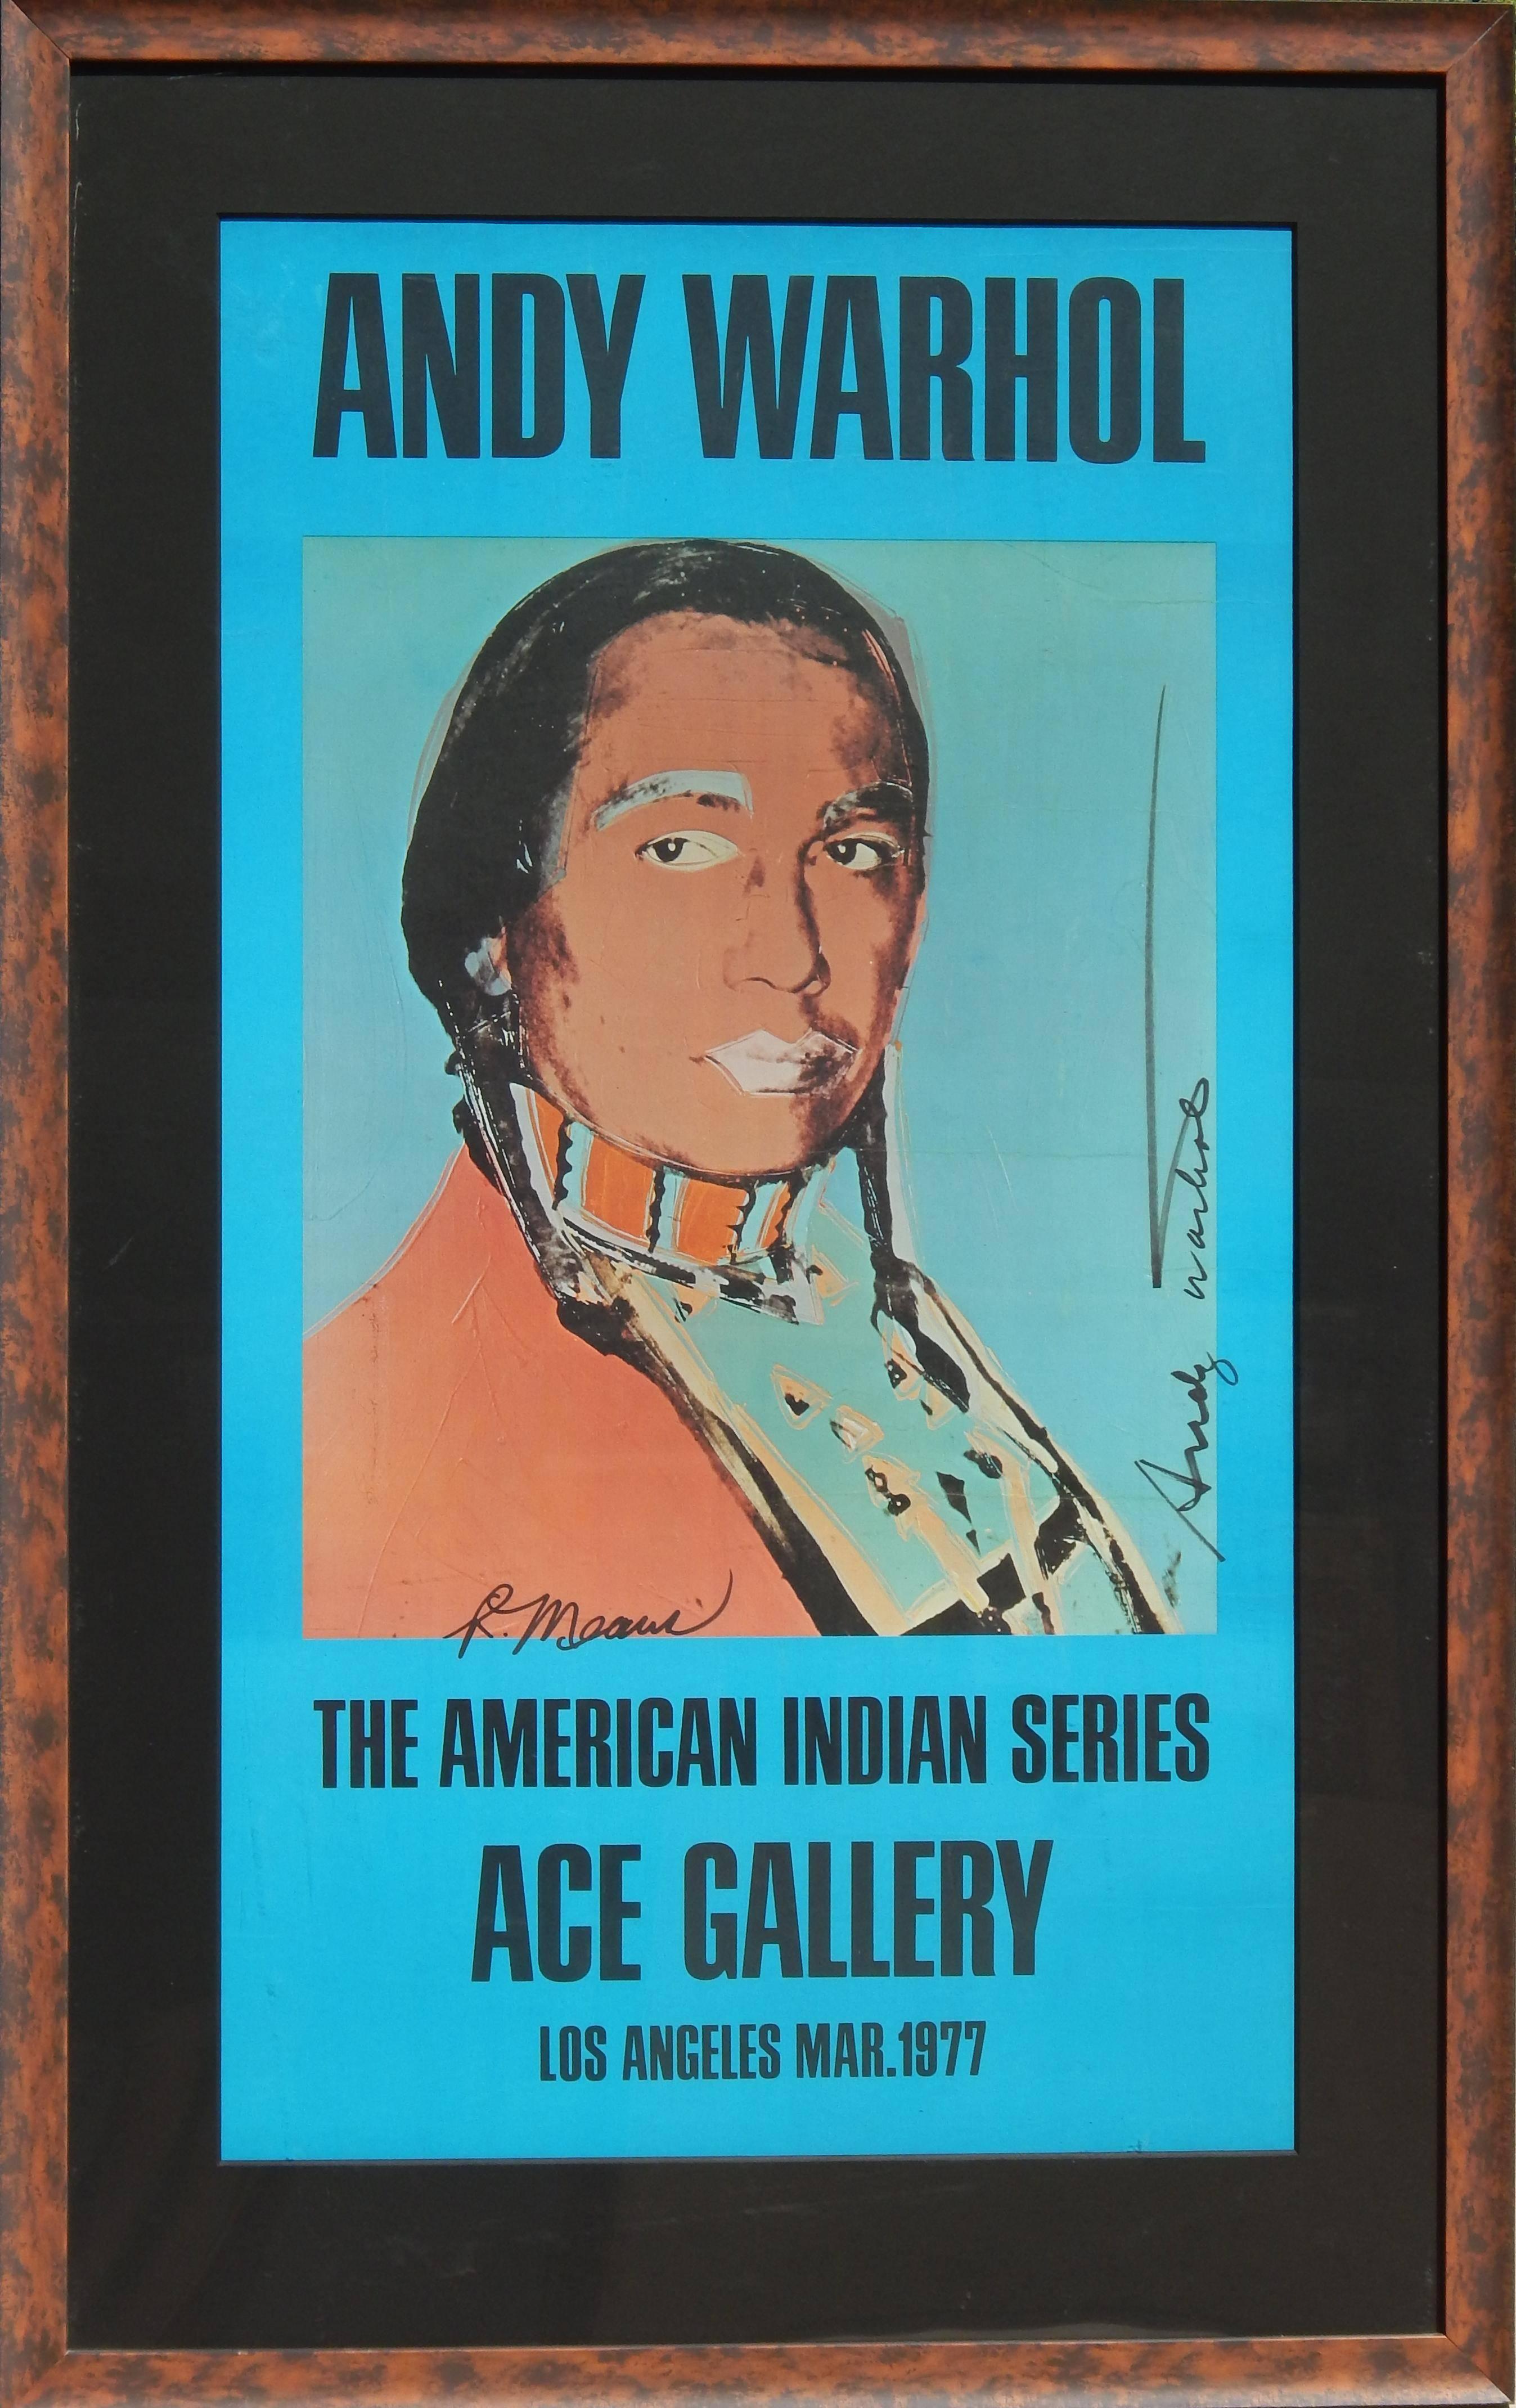 This framed poster created for Ace Gallery in 1977 is from the 
American Indian Series and has an original signature on it by
both Andy Warhol, who designed the image and by Russell
Means, the Native American activist. Both signatures are